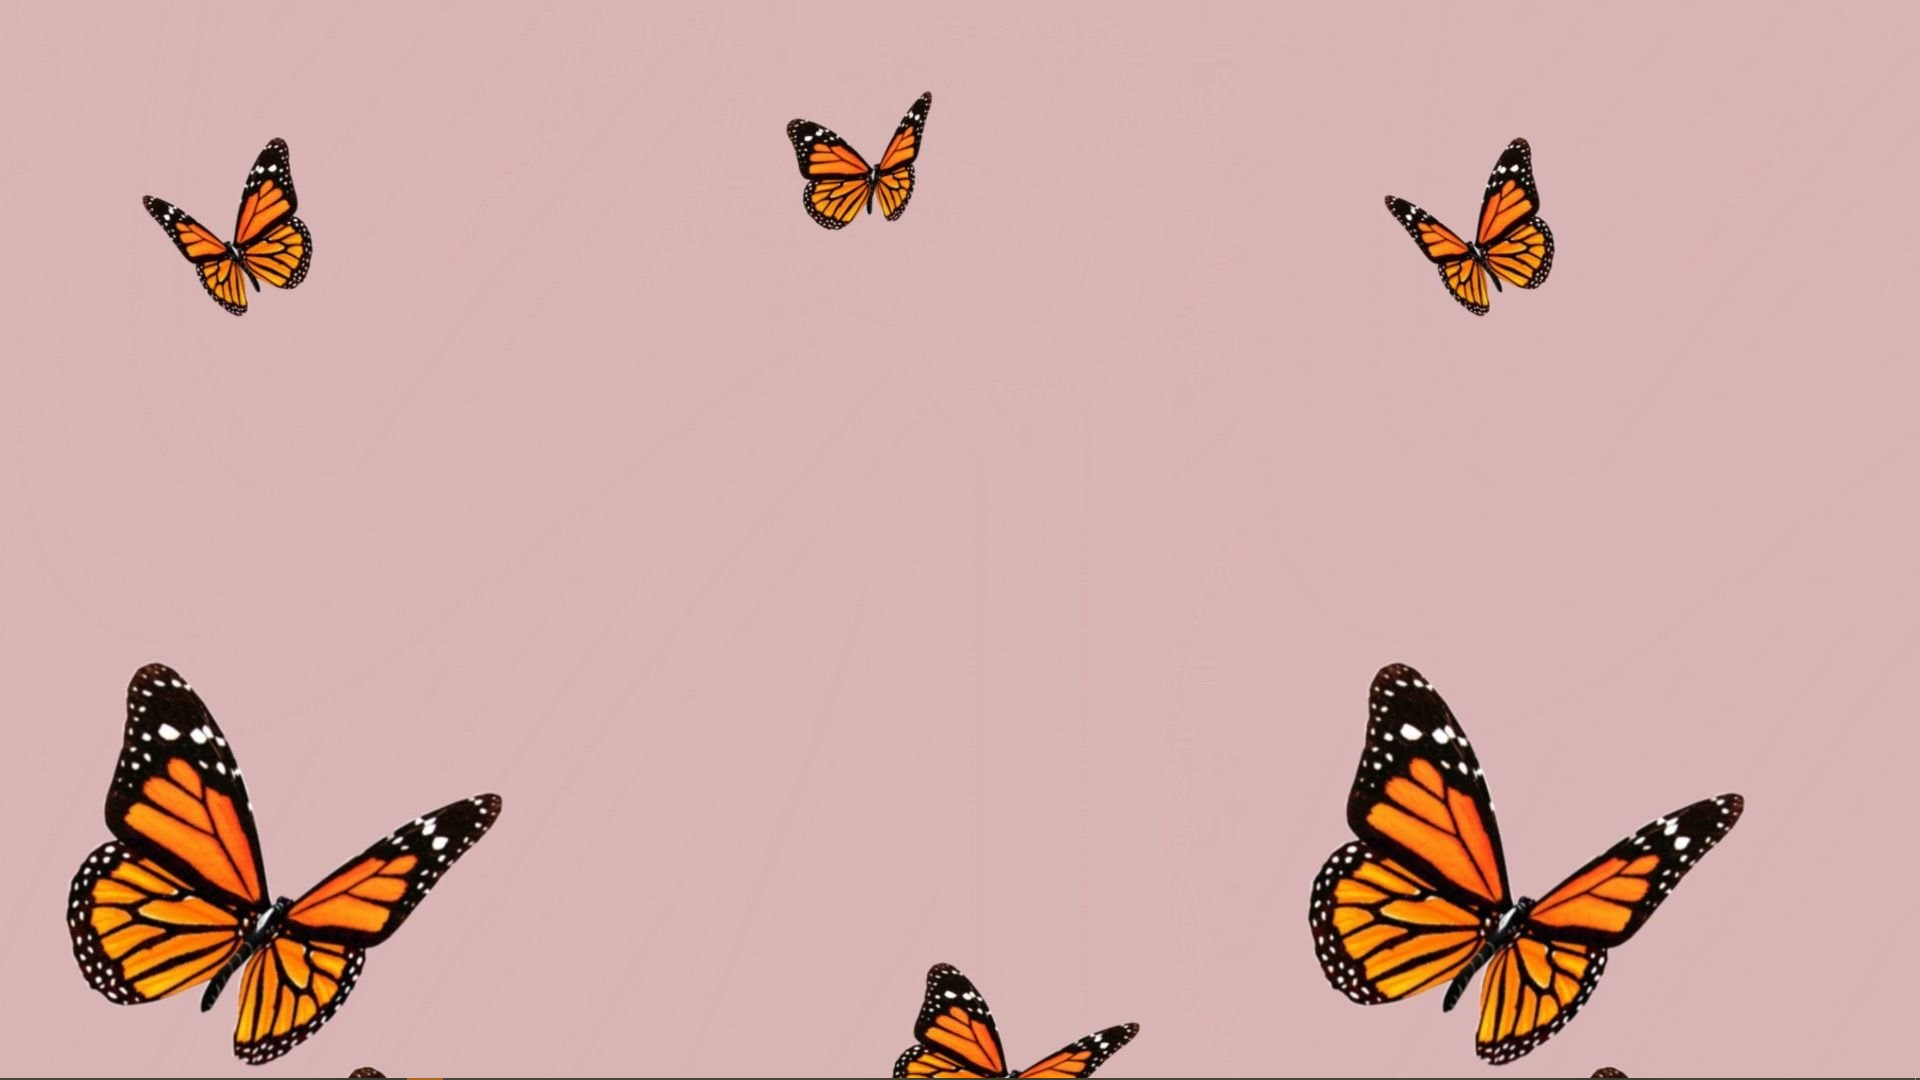 Butterfly Laptop Aesthetic Wallpapers - Wallpaper Cave